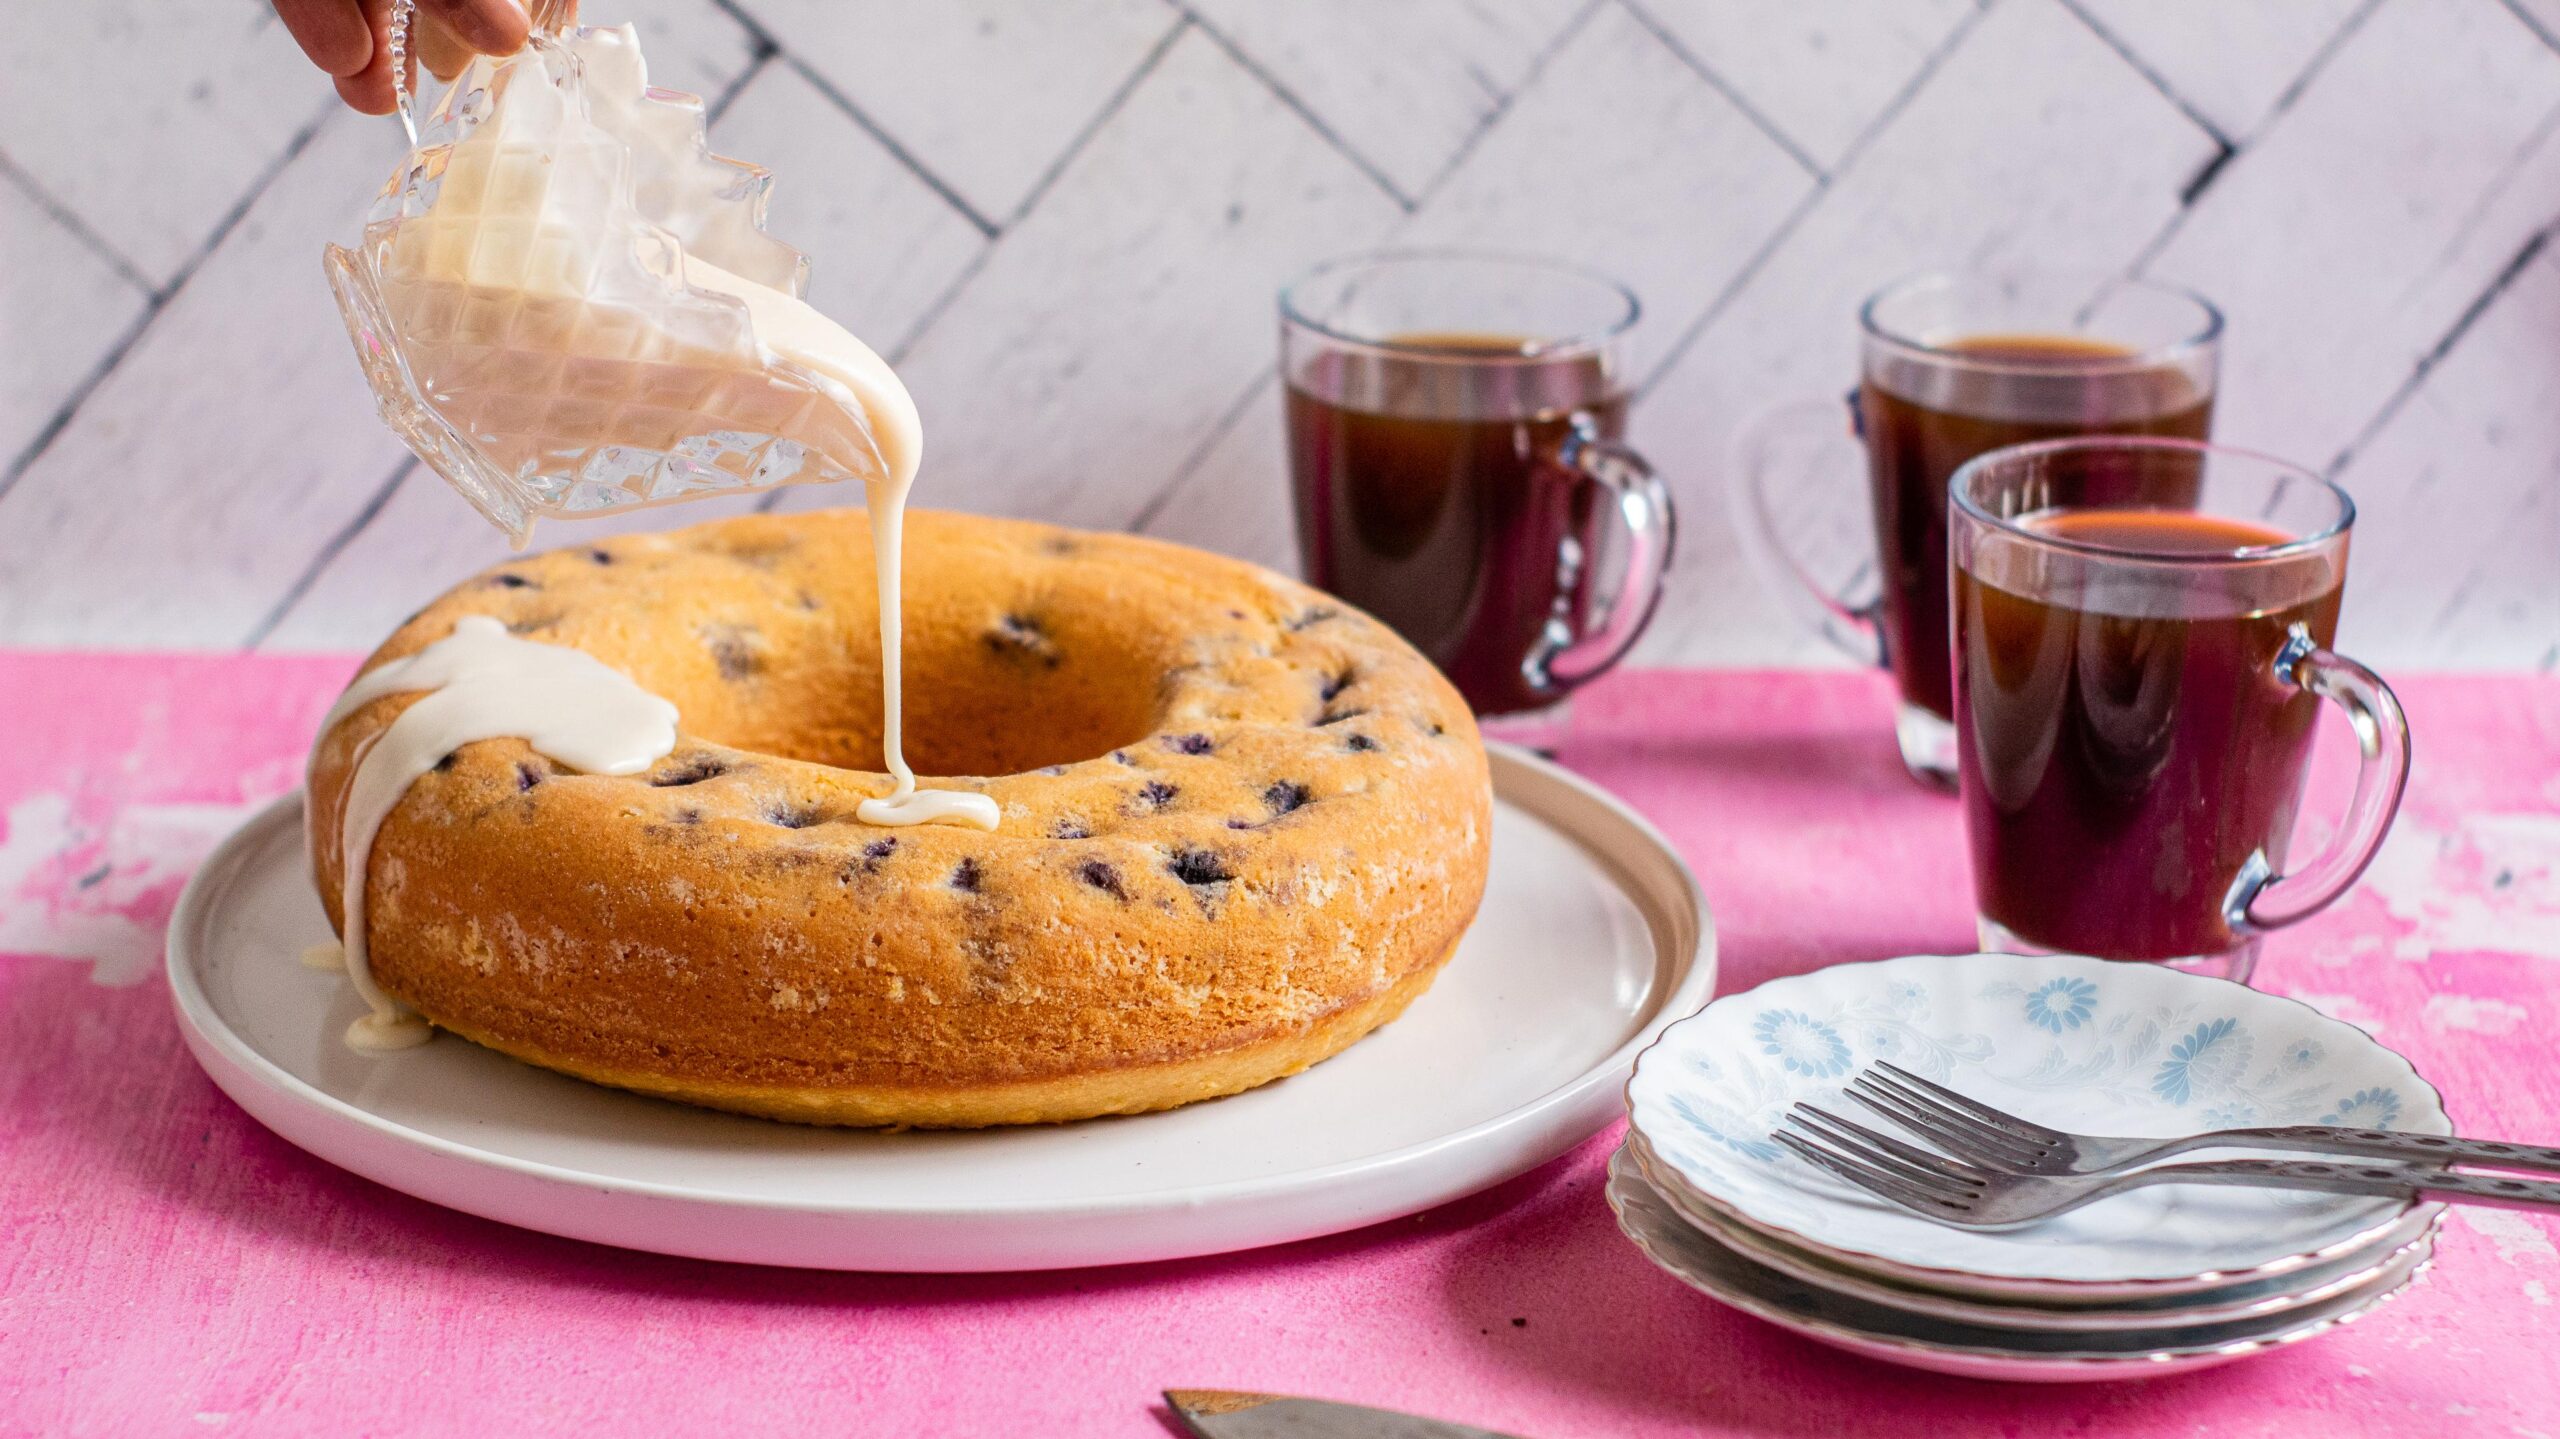  Sweeten your morning with this divine Blueberry Coffee Cake!